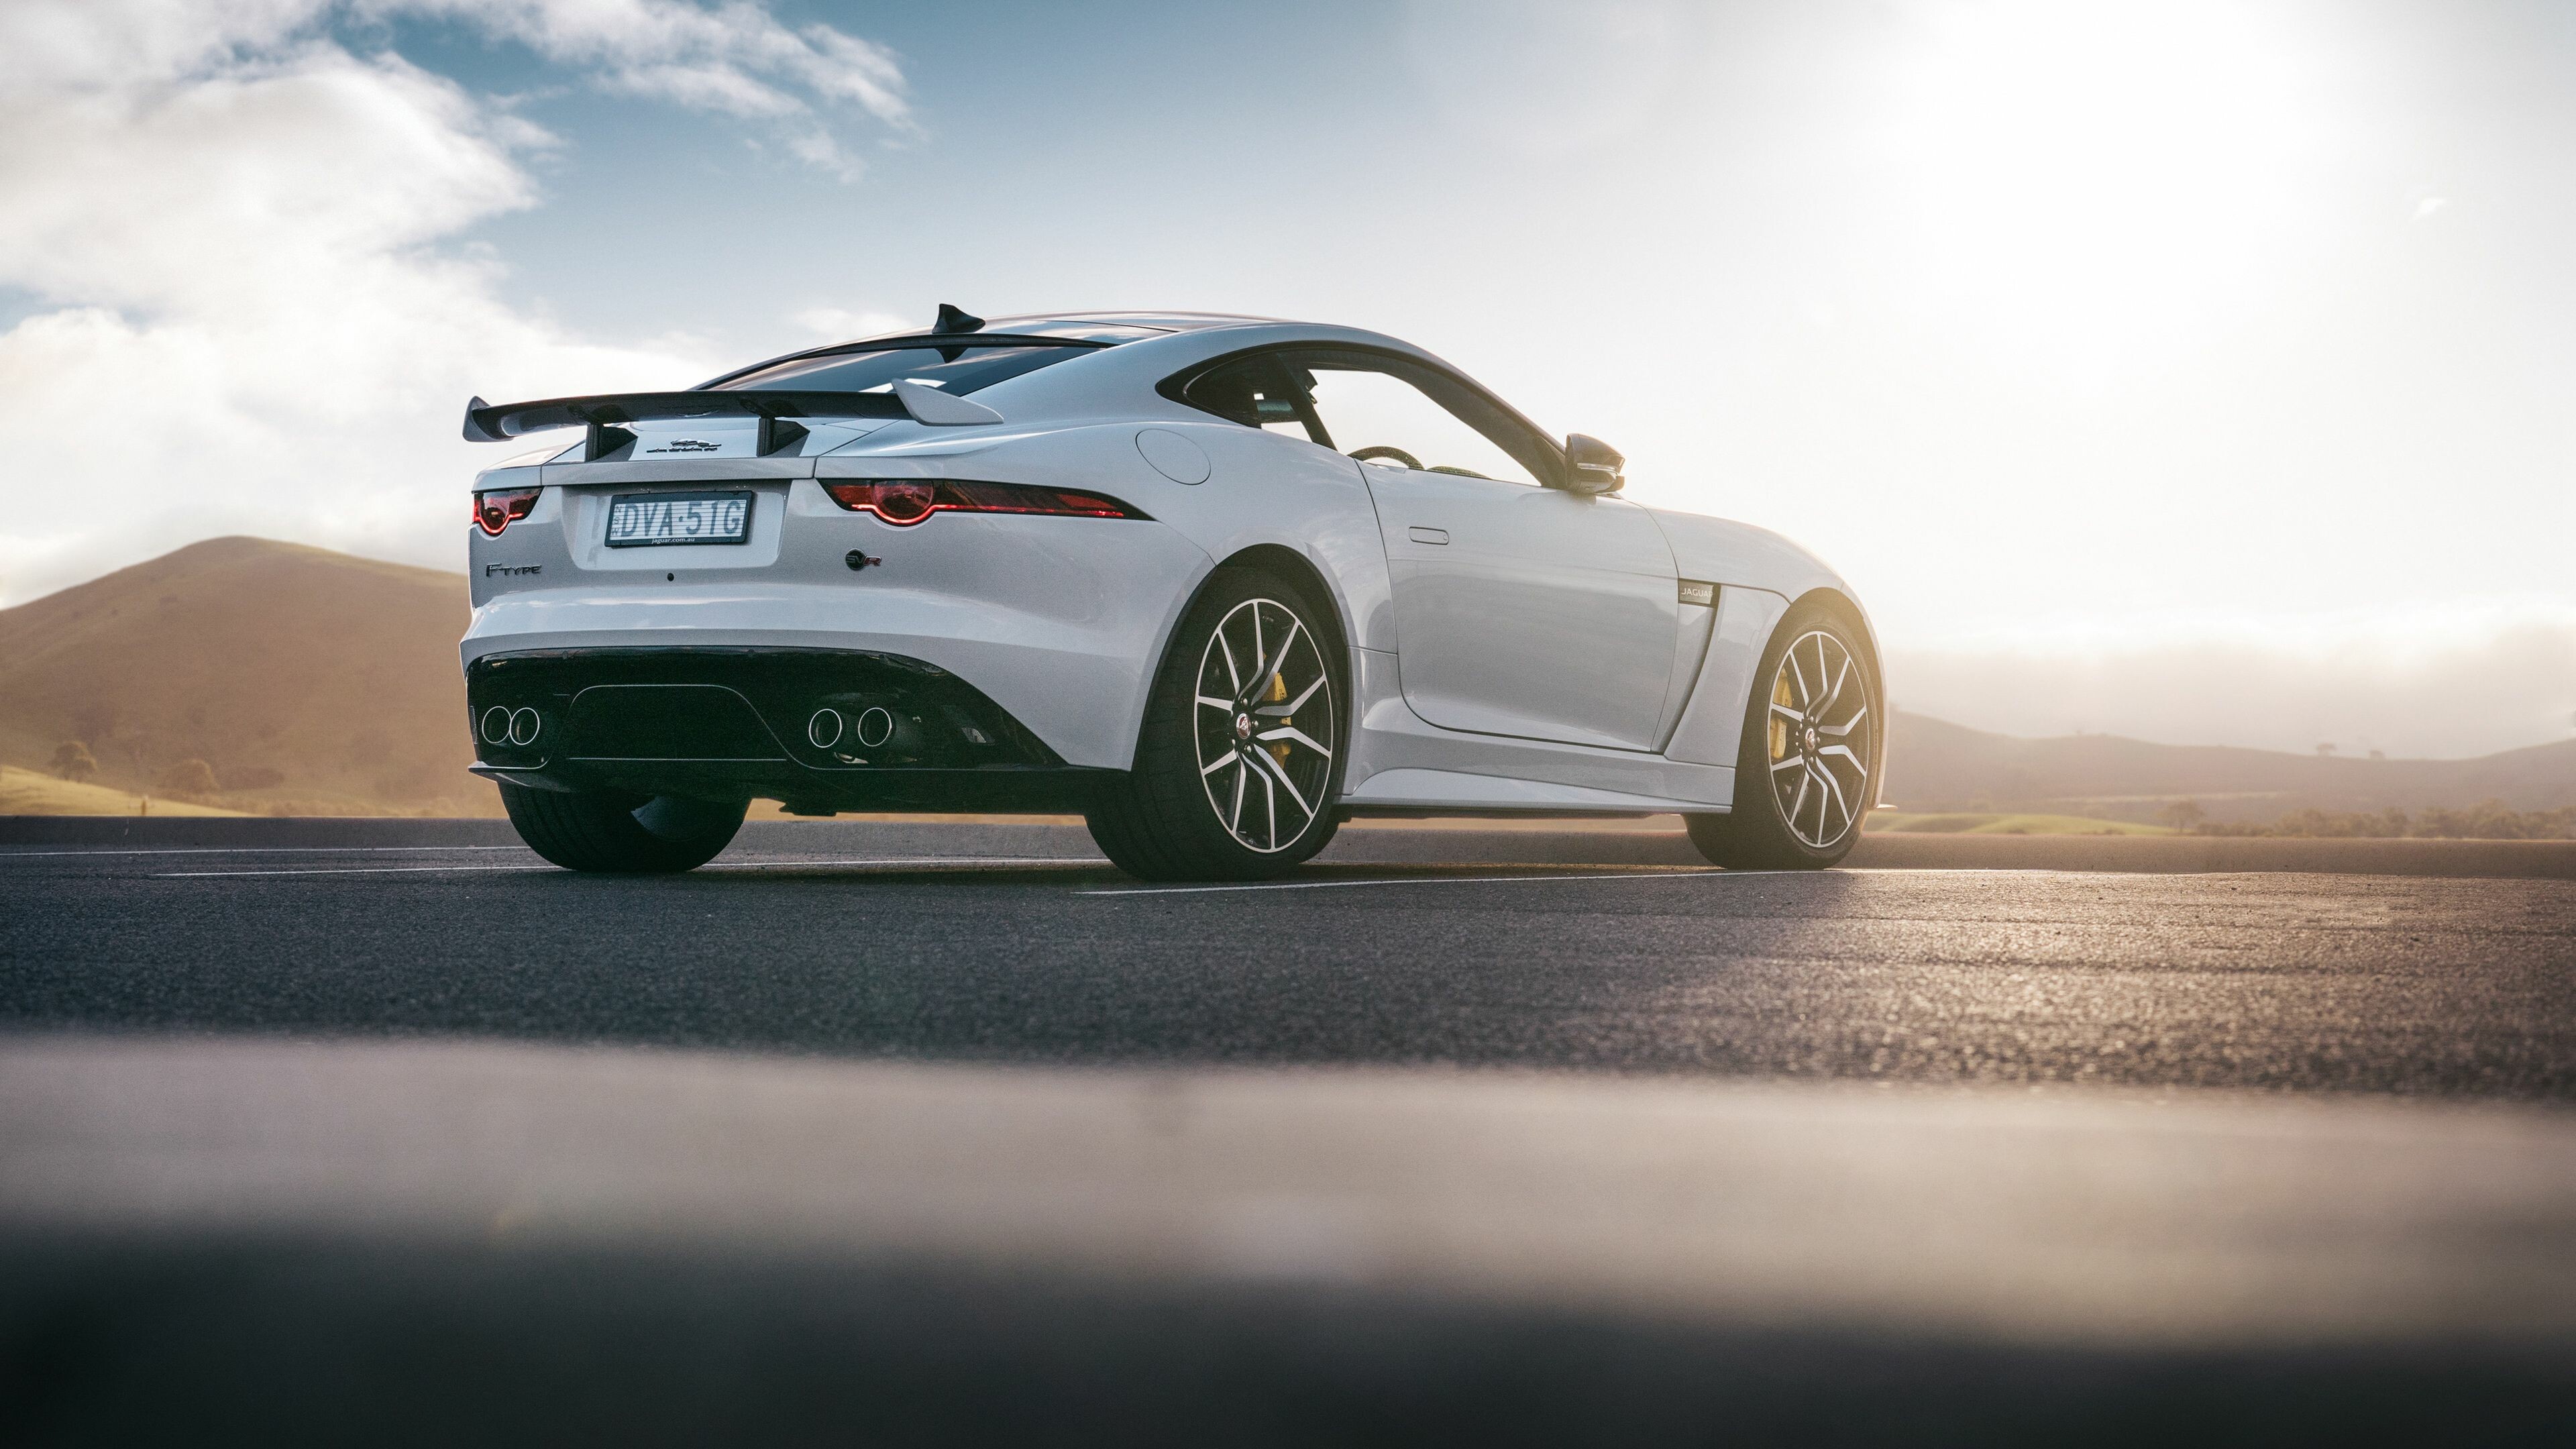 Jaguar Cars: F-Type, A series of two-door, two-seater grand tourers manufactured by British luxury car manufacturer. 3840x2160 4K Background.